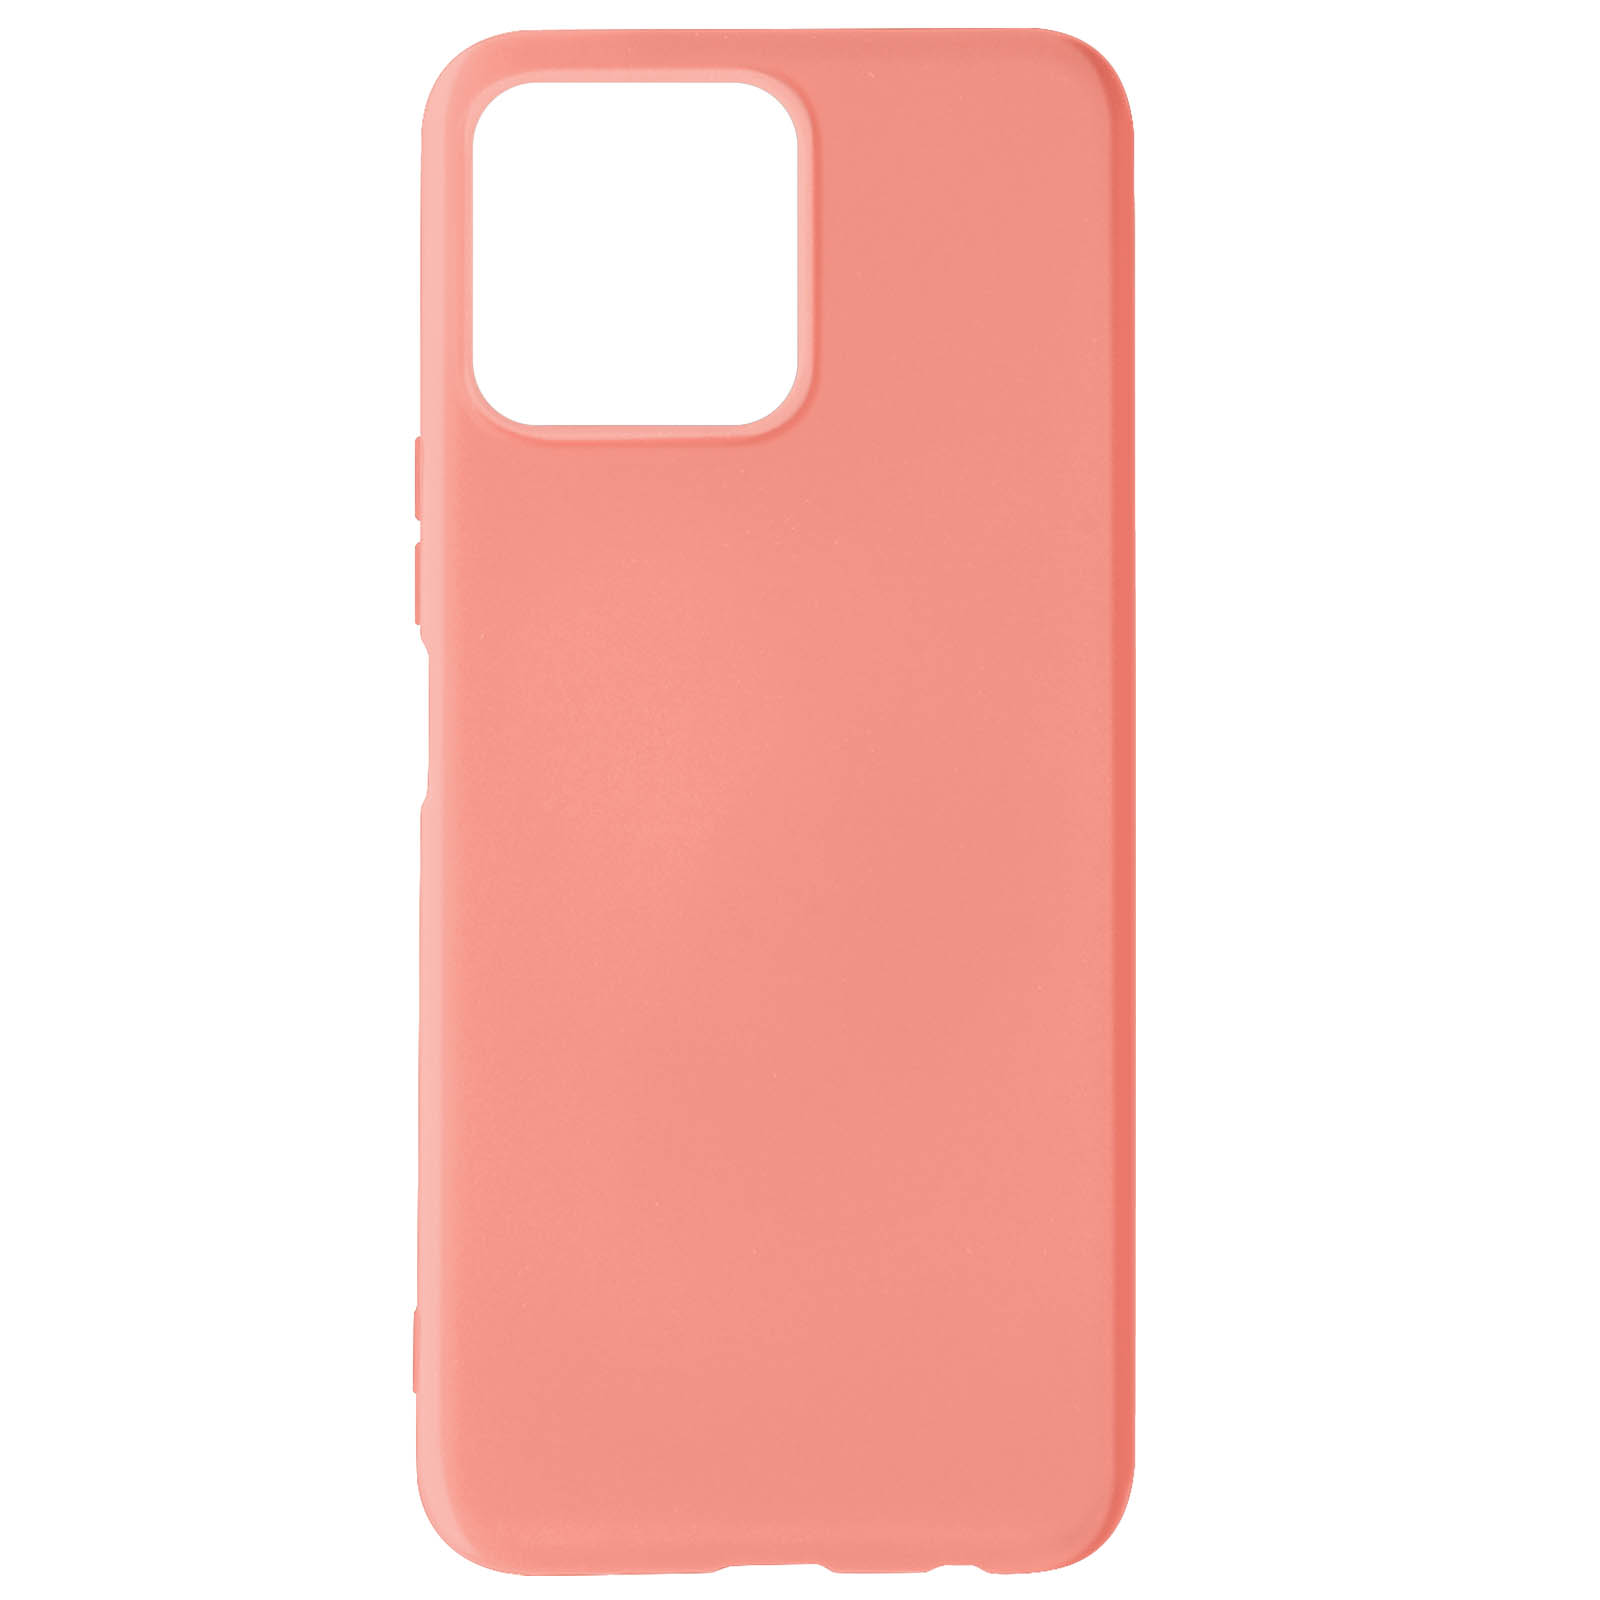 Touch Honor, Soft Series, X8, Rosa AVIZAR Honor Backcover,